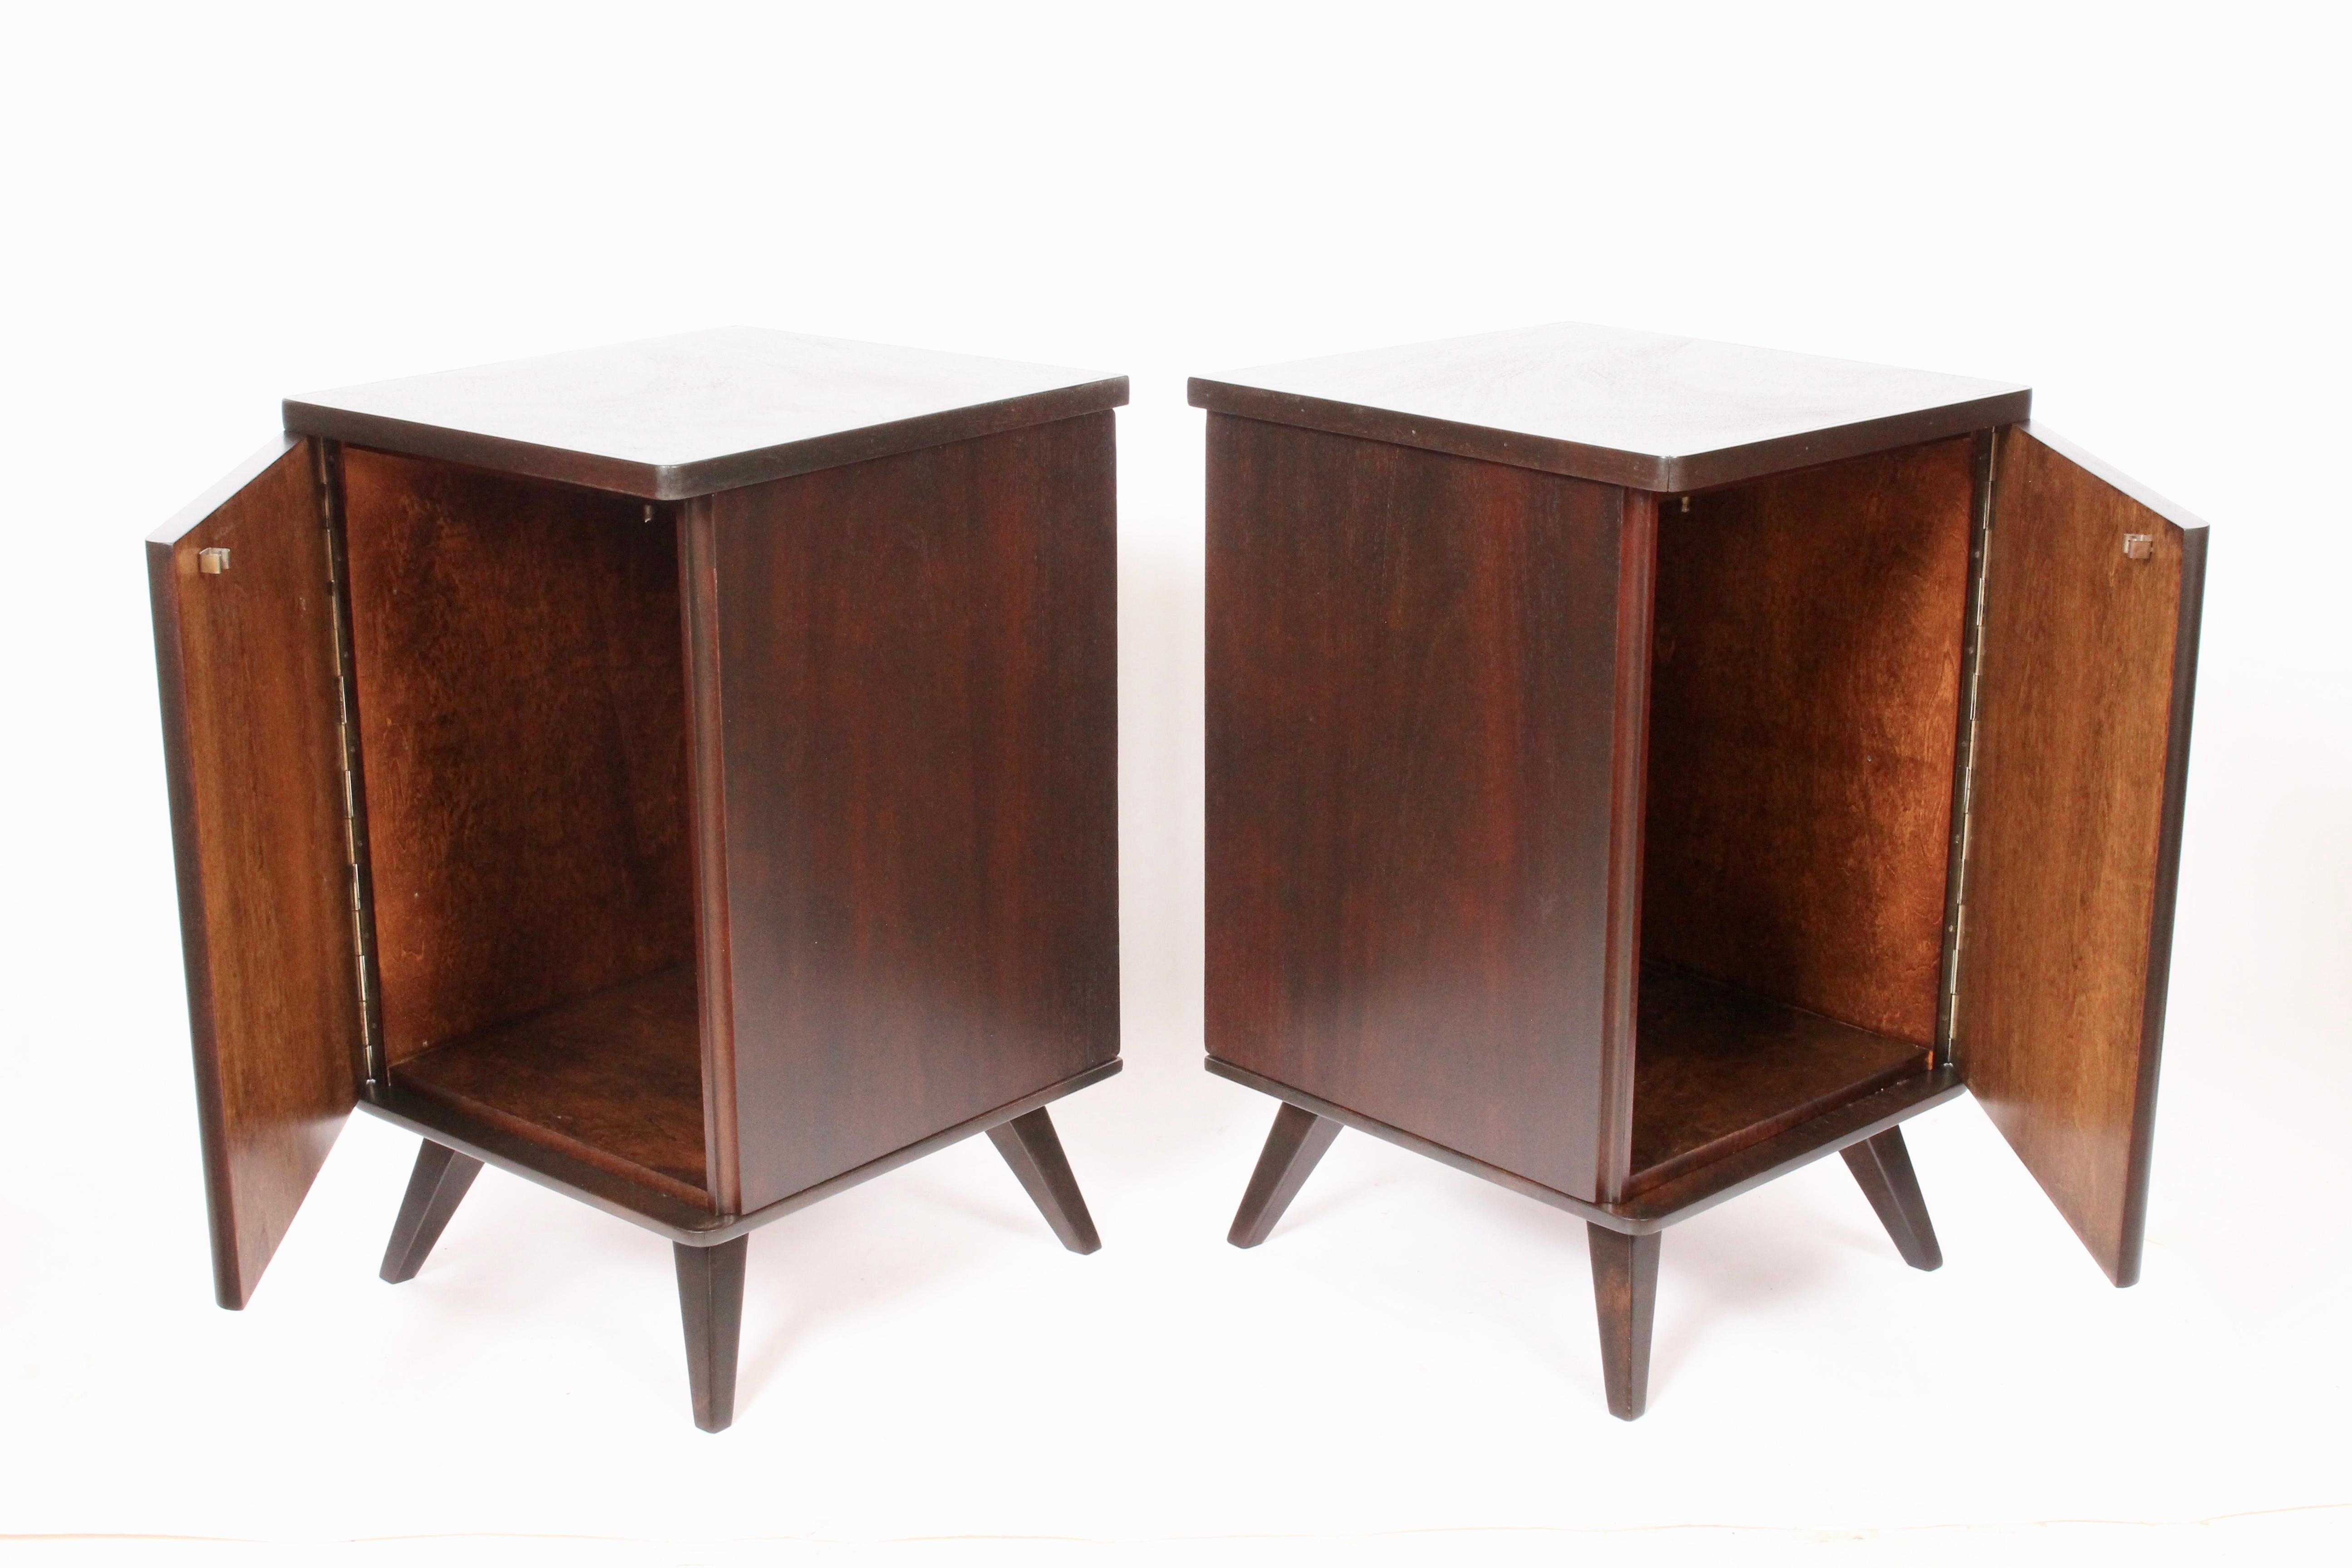 Pair of Swedish handcrafted dark walnut Bedside Cabinets, circa 1950. Featuring a finely crafted, sturdy square, beautifully grained Walnut frame on splayed legs with single piano hinged swing door providing large interior storage space. Stamped